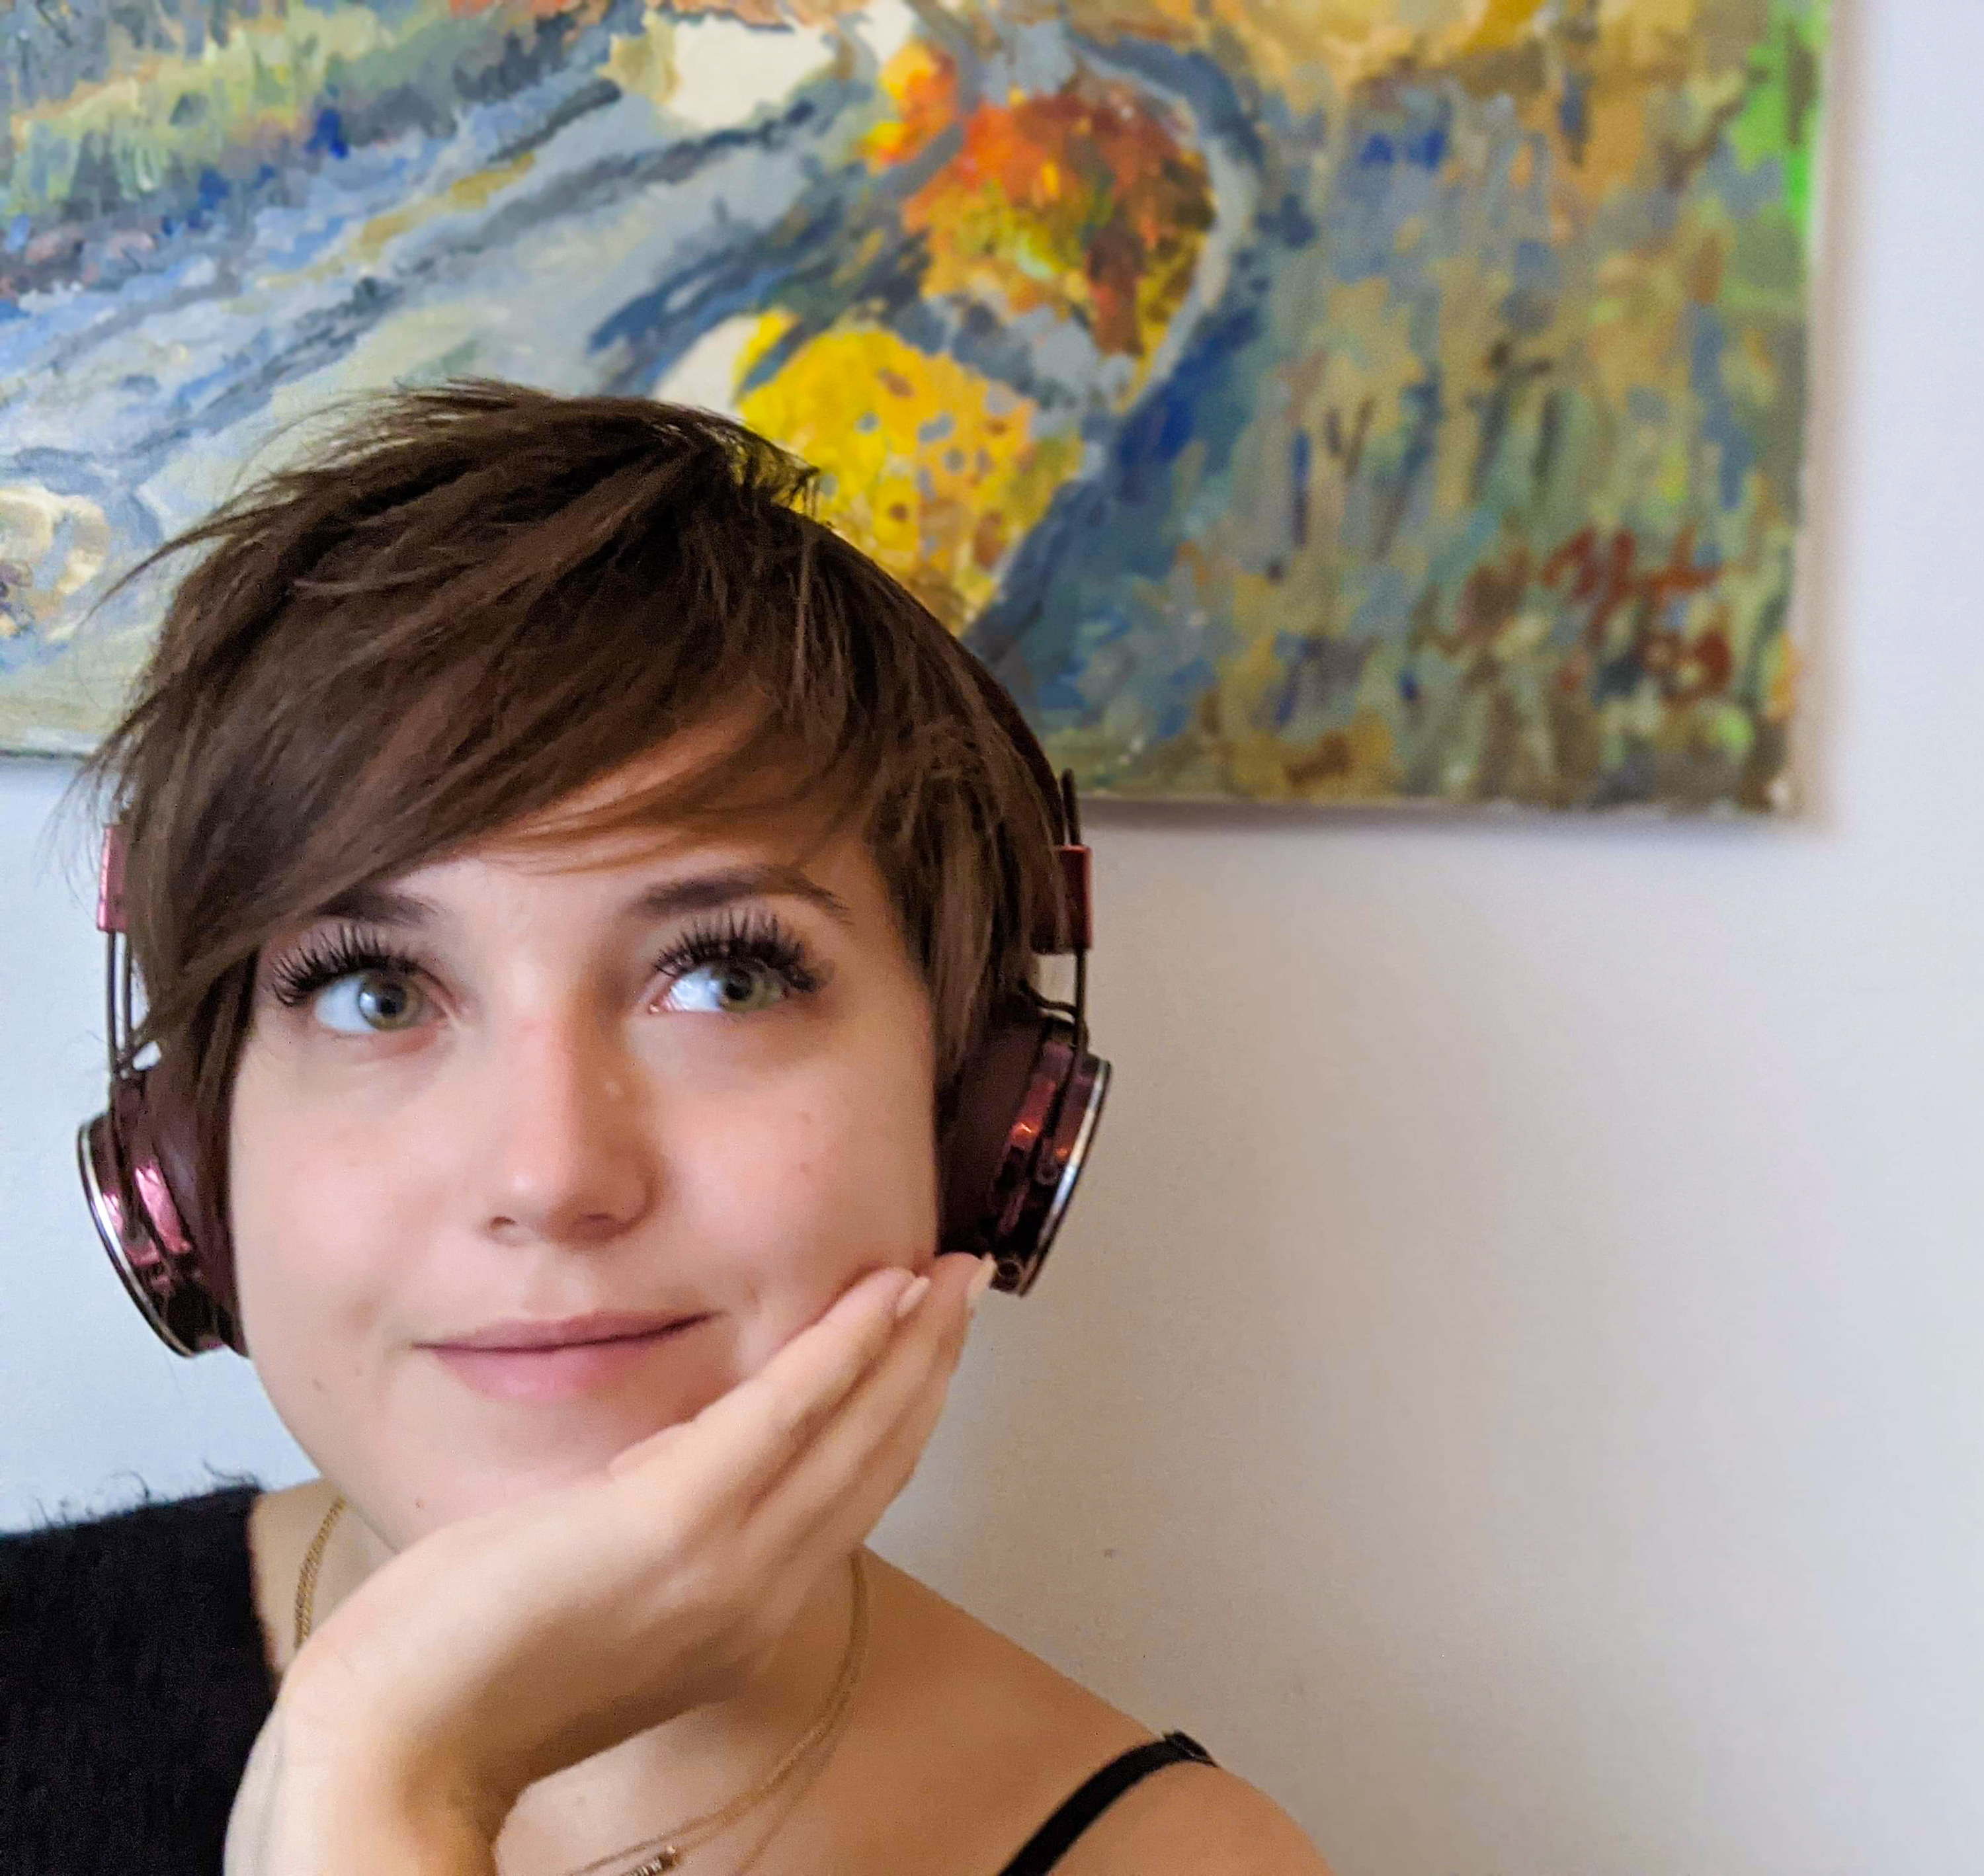 A smiling person wearing the over the ear headphones while looking off-camera